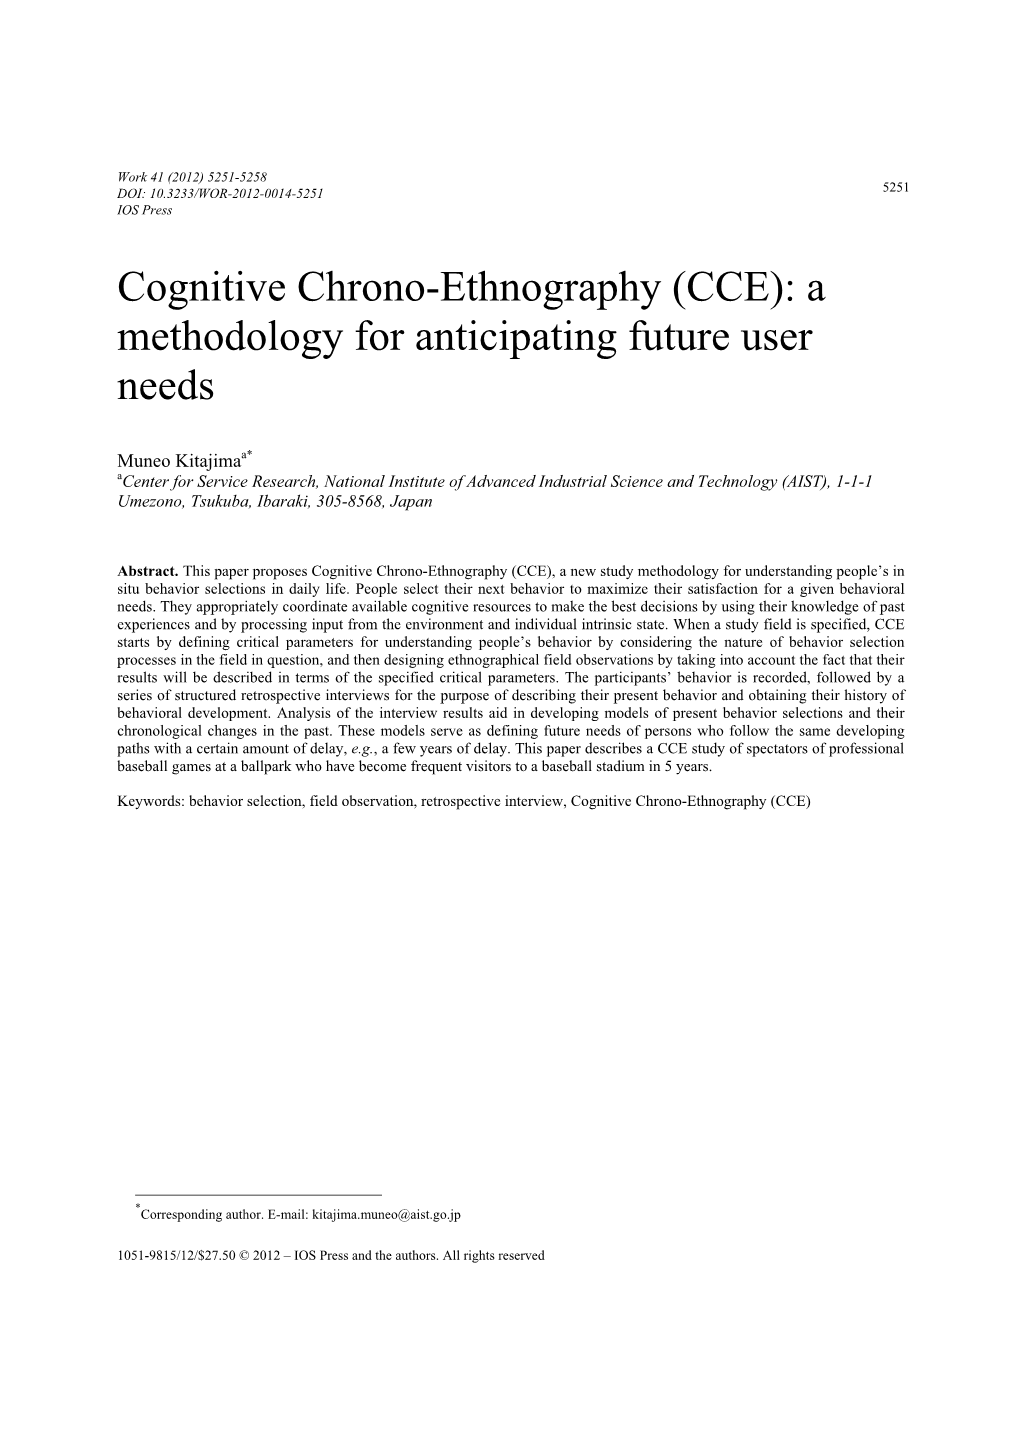 Cognitive Chrono-Ethnography (CCE): a Methodology for Anticipating Future User Needs